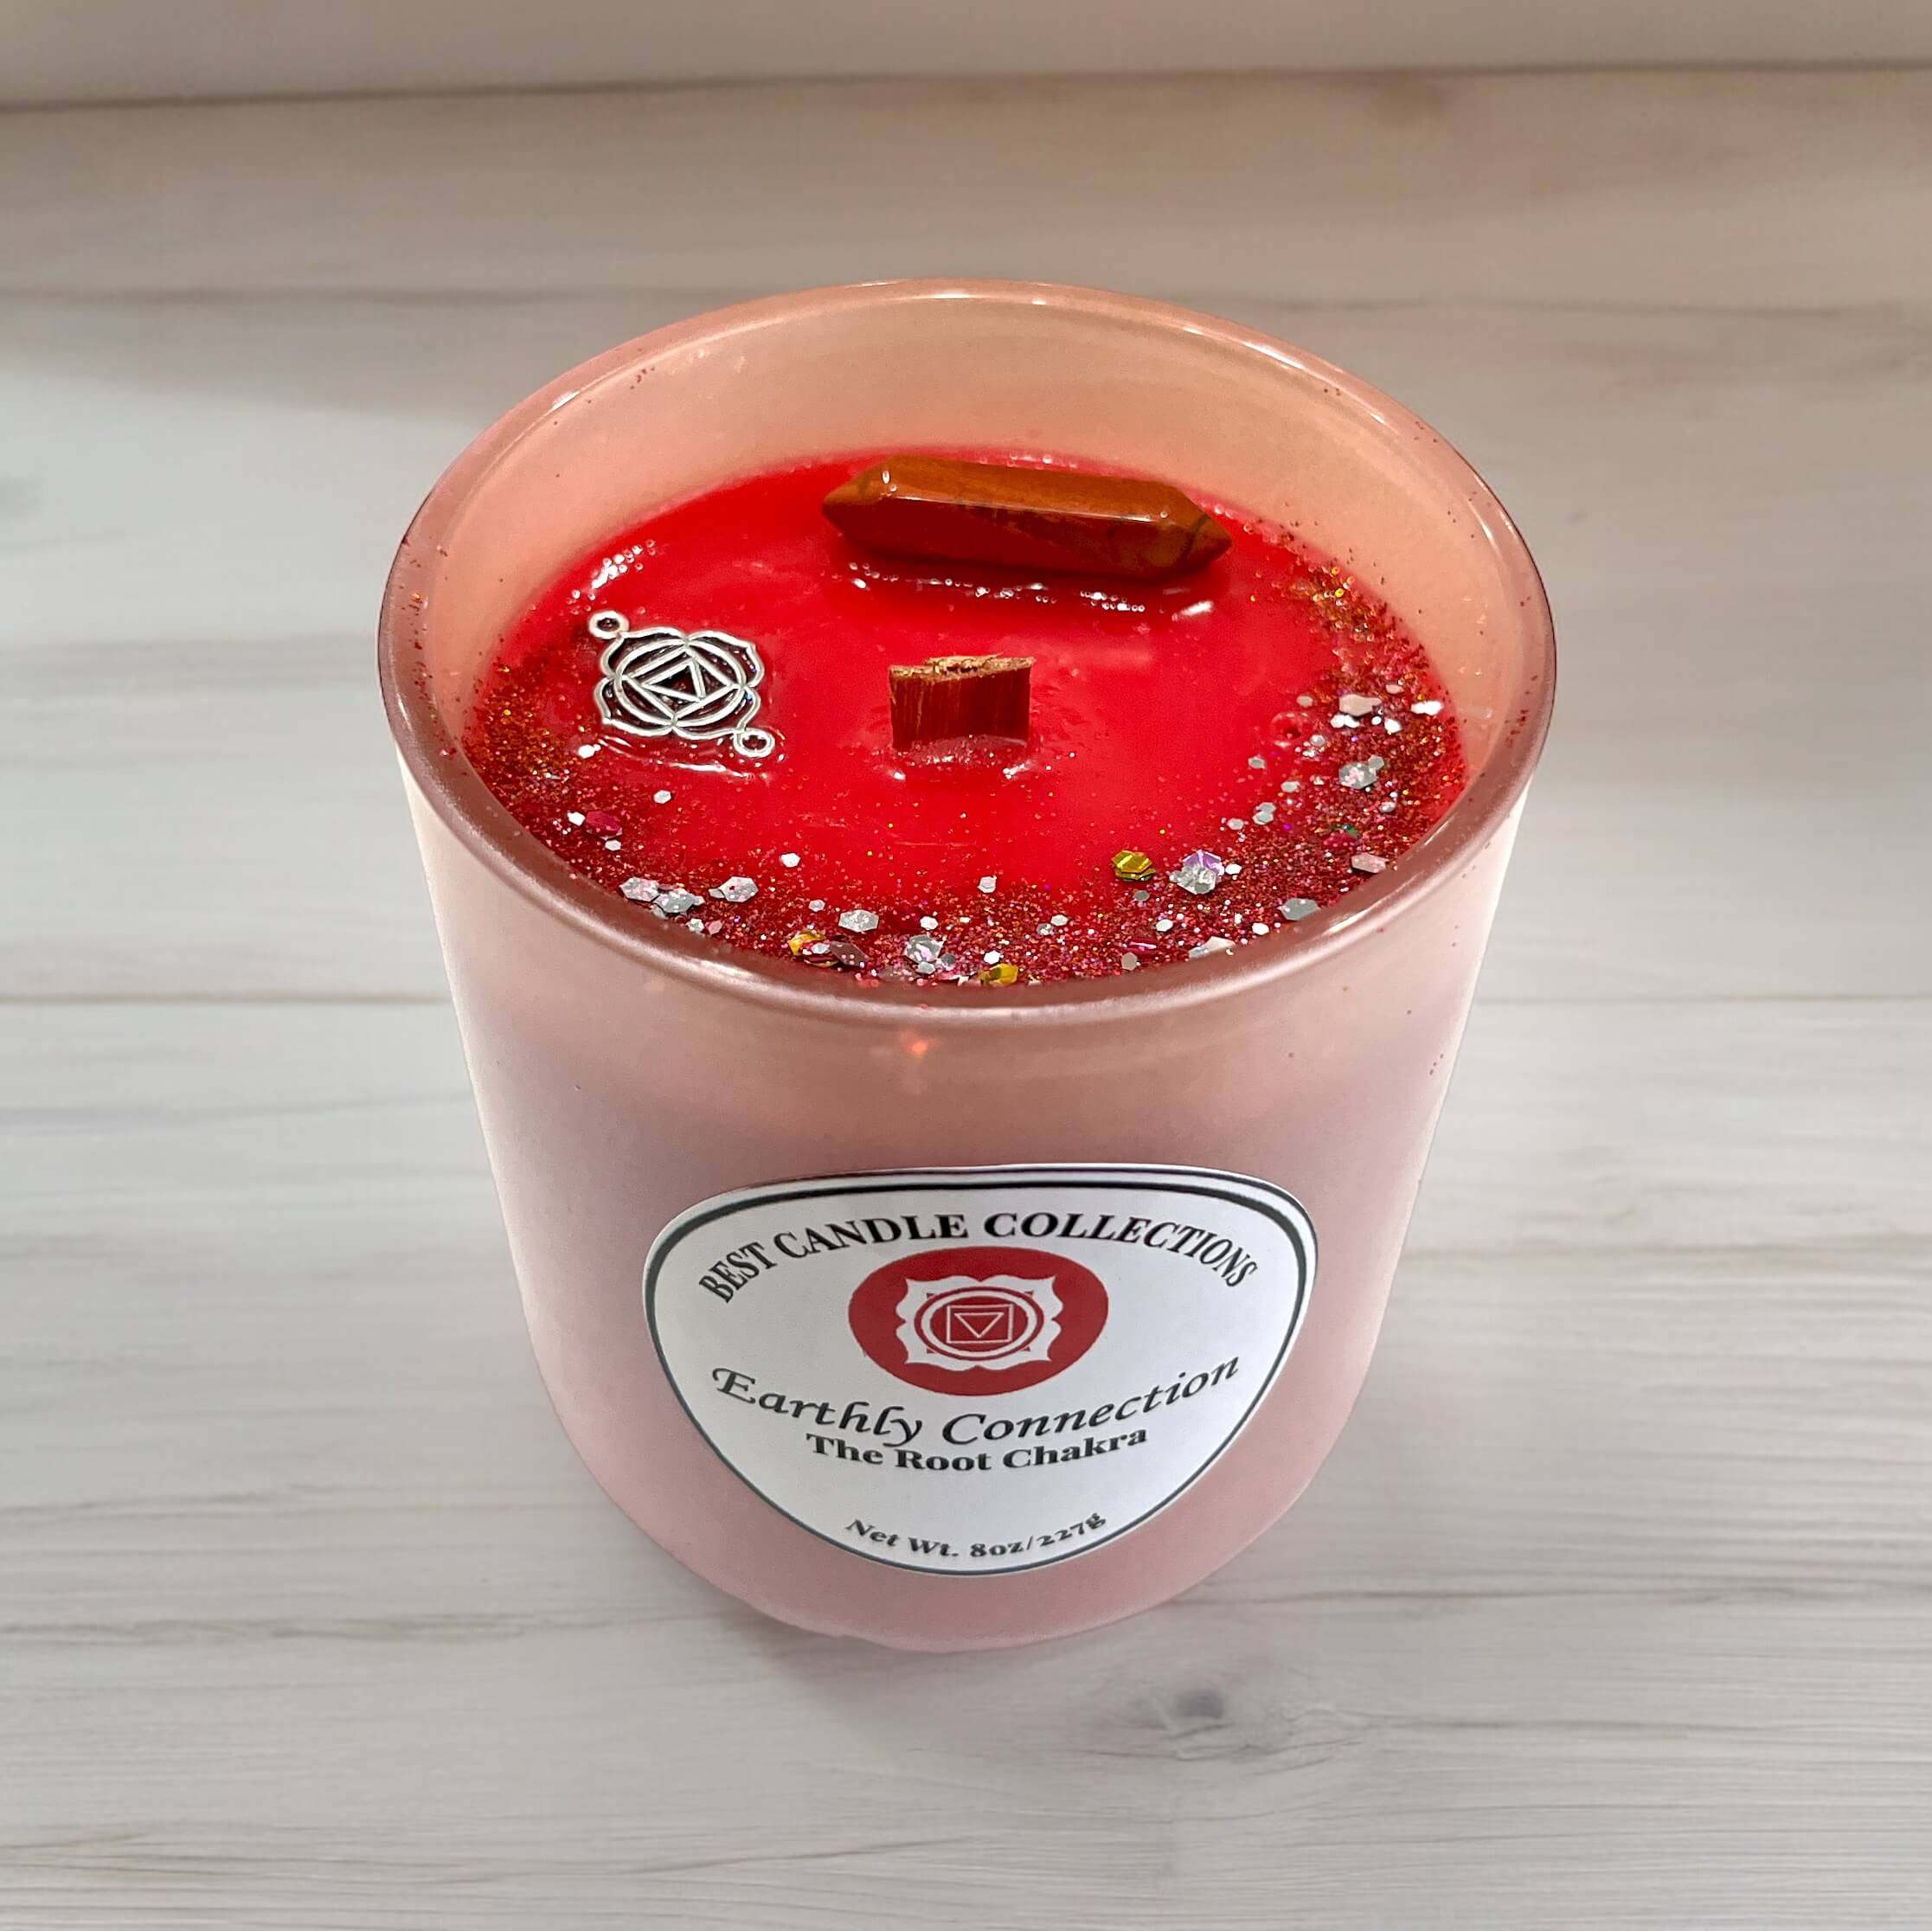 Earthly Connection - The Root Chakra Candle 8oz